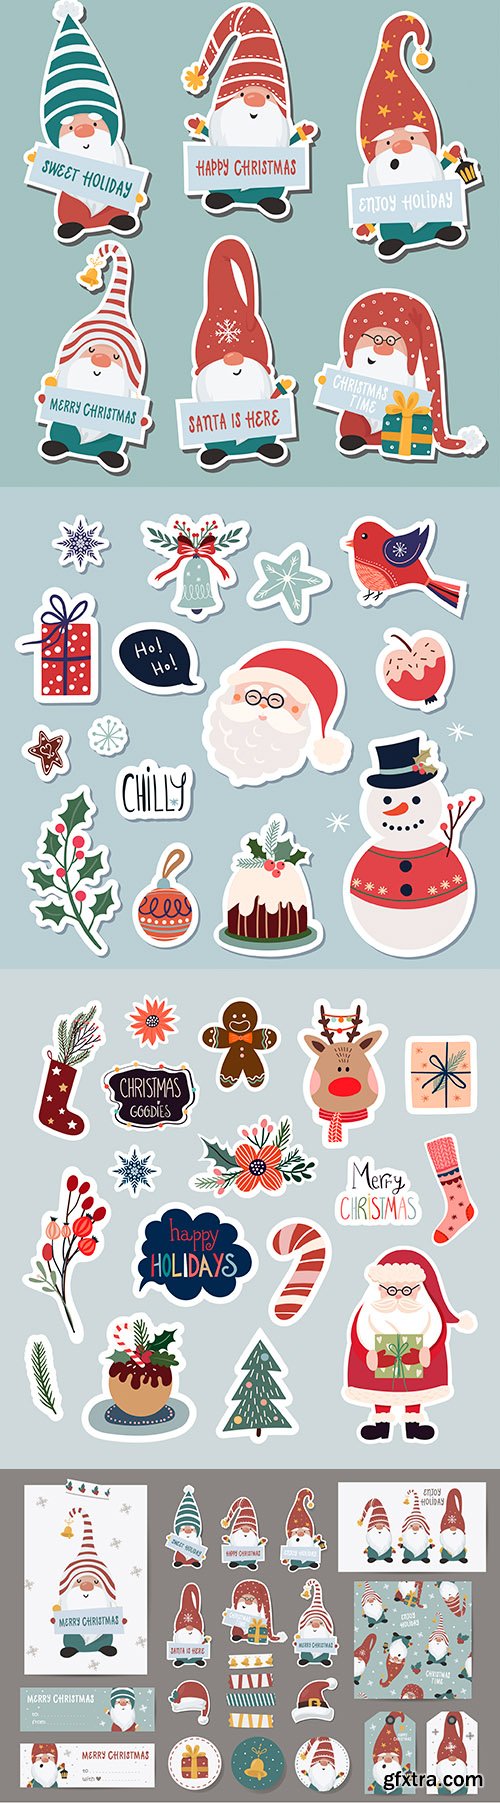 Cute Santa Claus collection of Christmas stickers elements